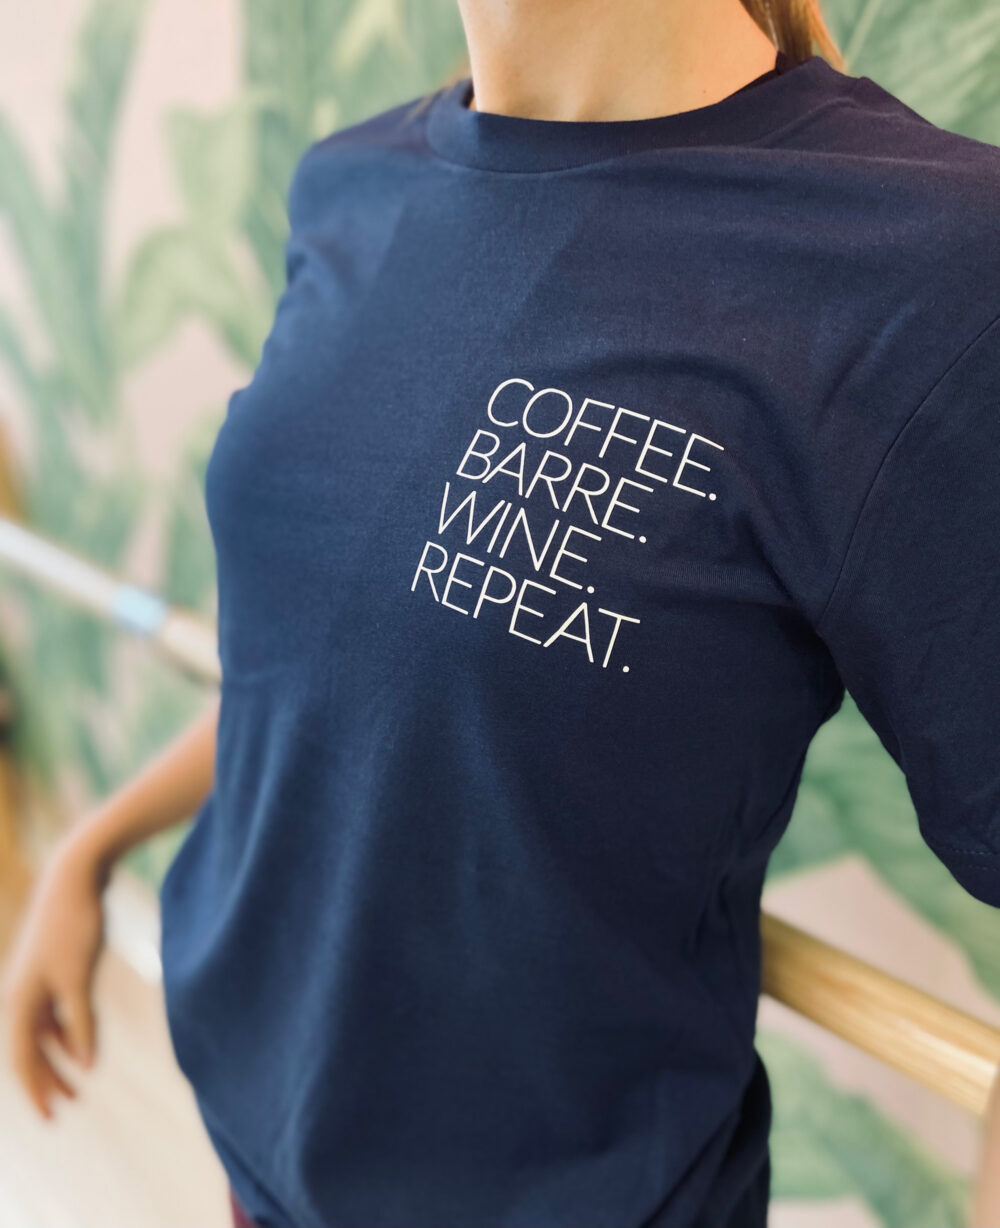 blue-tee-shirt-coffee-barre-wine-repeat-bx-studio-online-boutique-barre-boxe-montreal